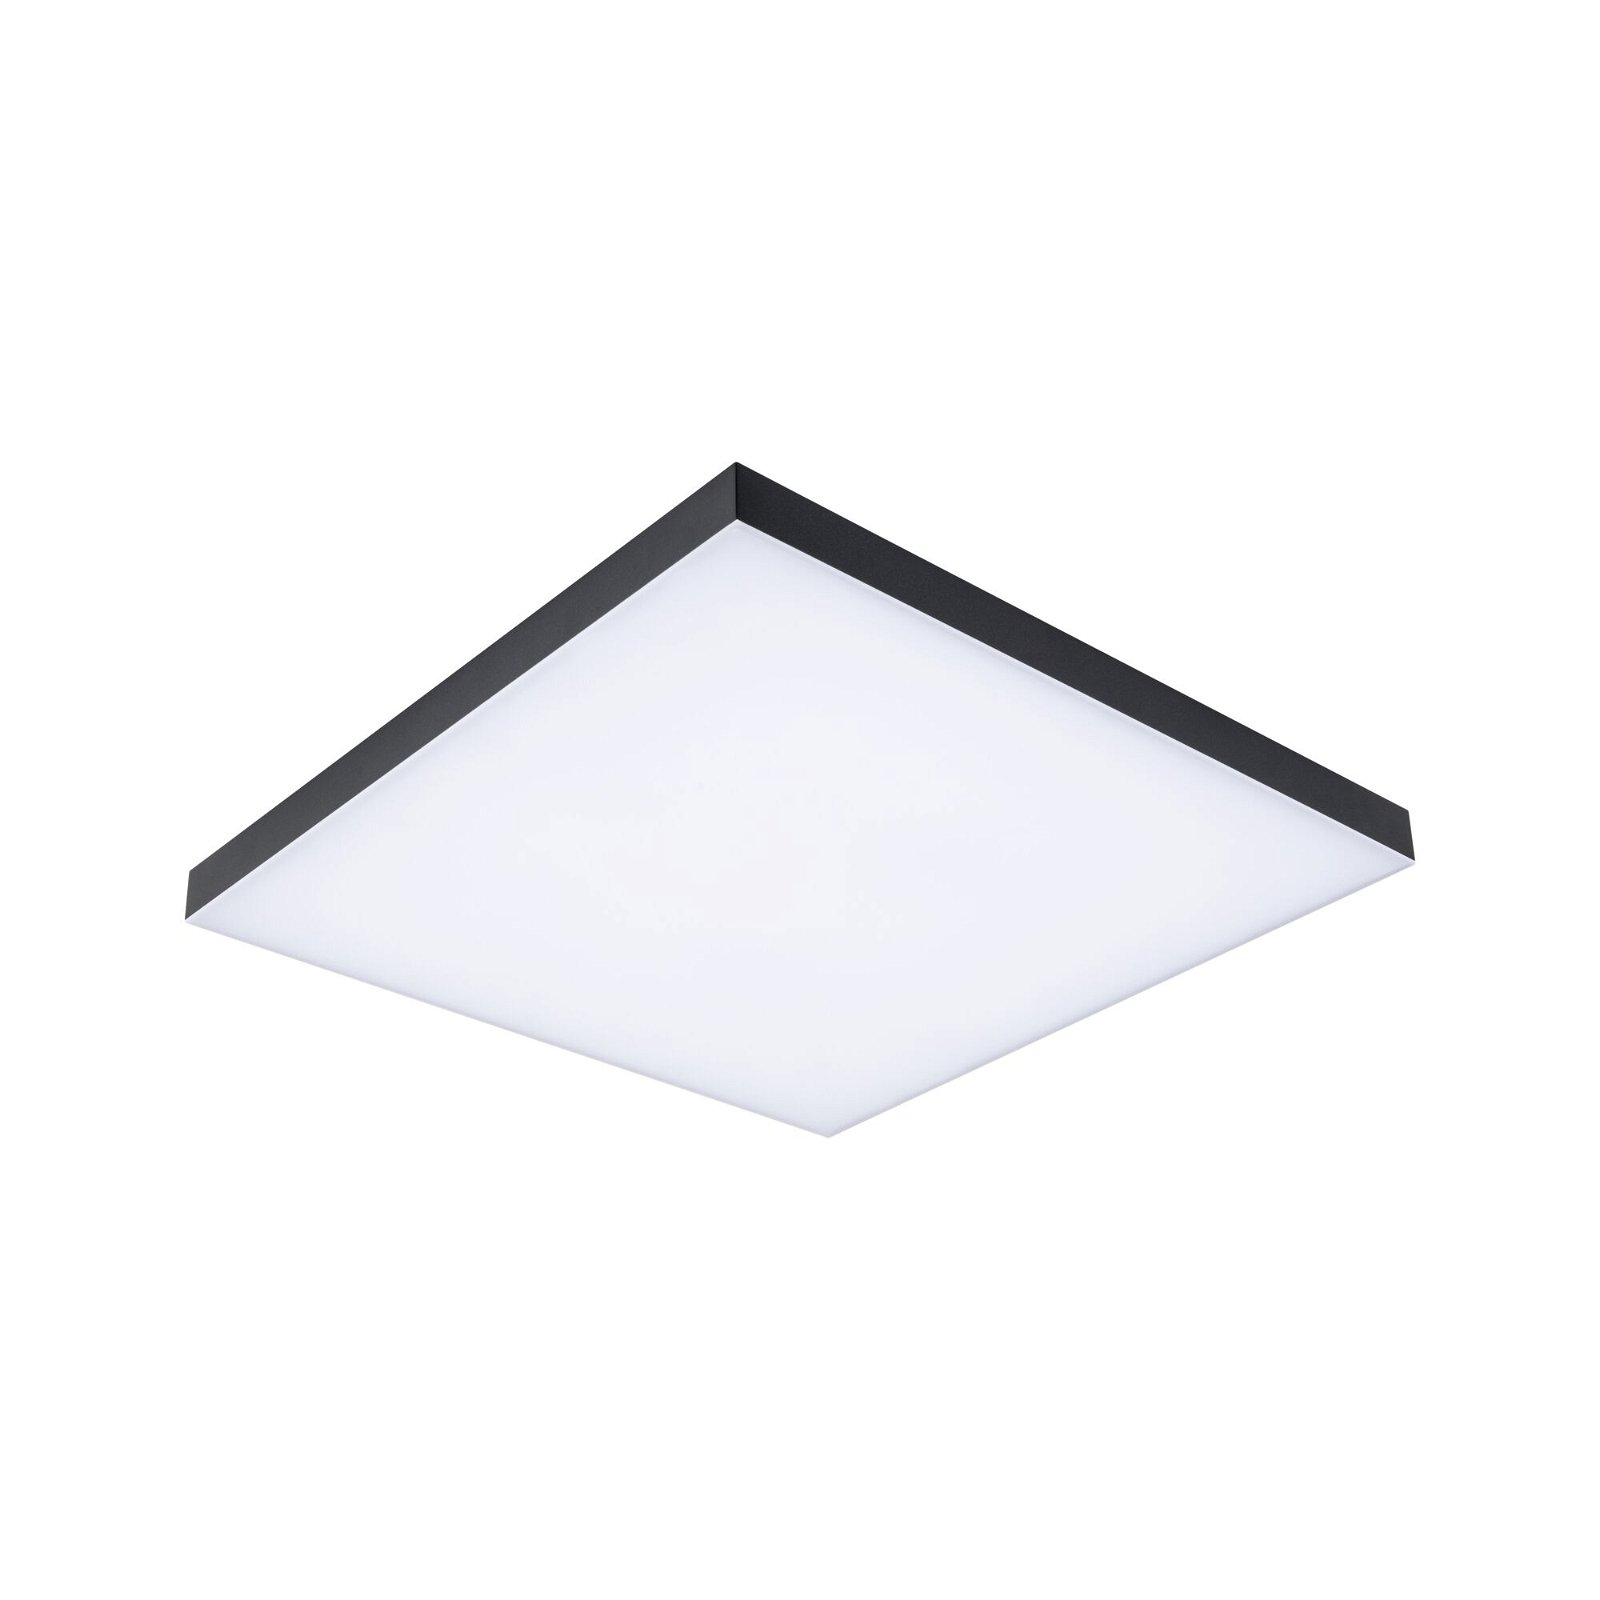 LED Panel Velora Rainbow dynamicRGBW square 450x450mm 3000 - 6500K Black dimmable